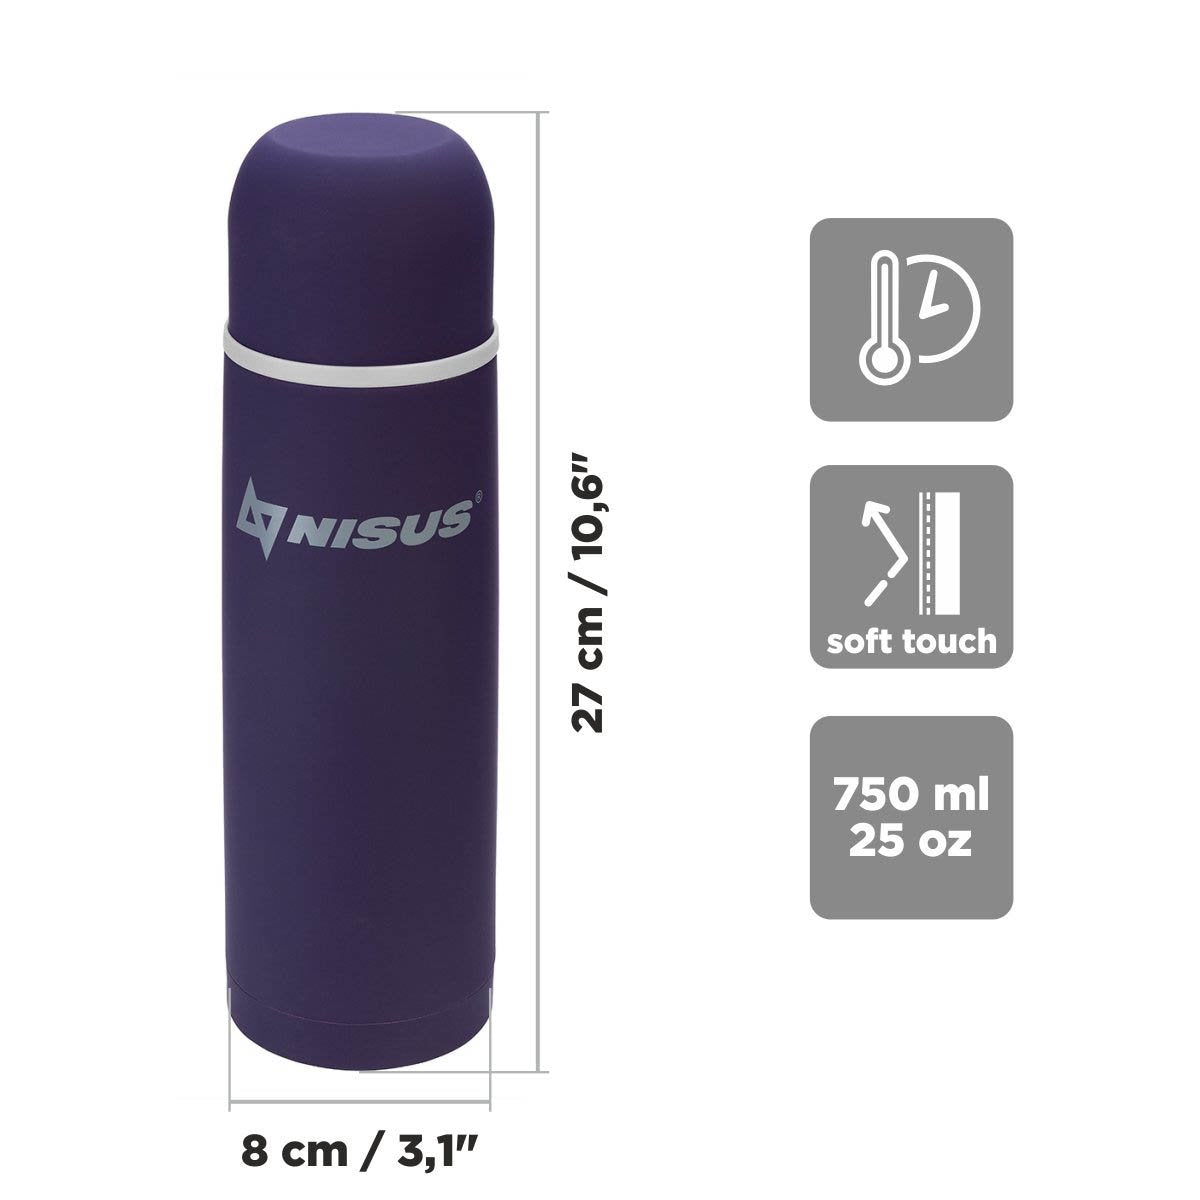 Portable Insulated Water Flask with Strainer, Purple, 25 oz is 10.6 inches high and 3.1 inches wide